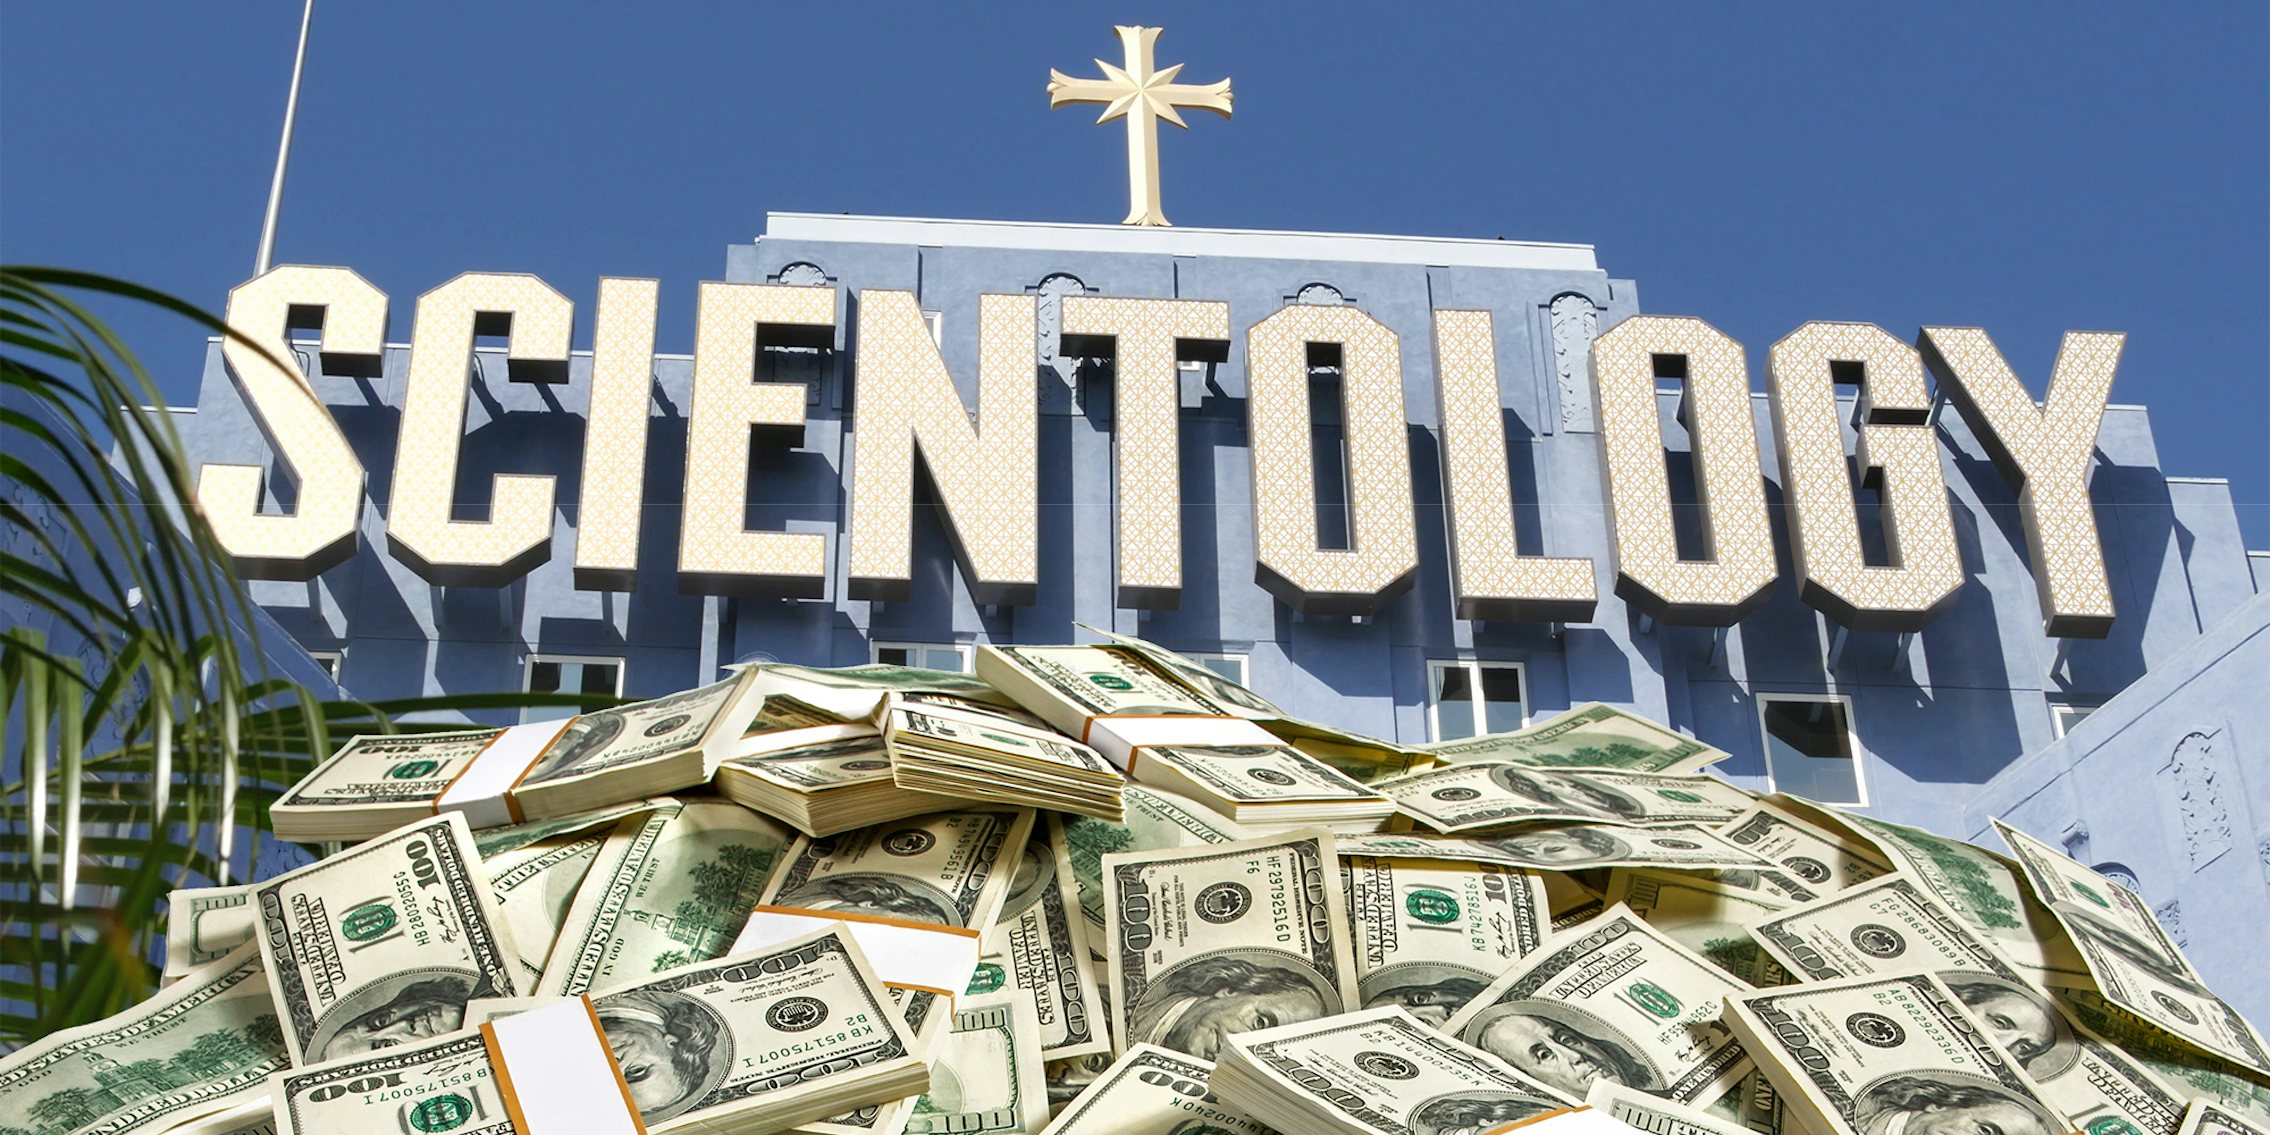 scientology center with pile of cash